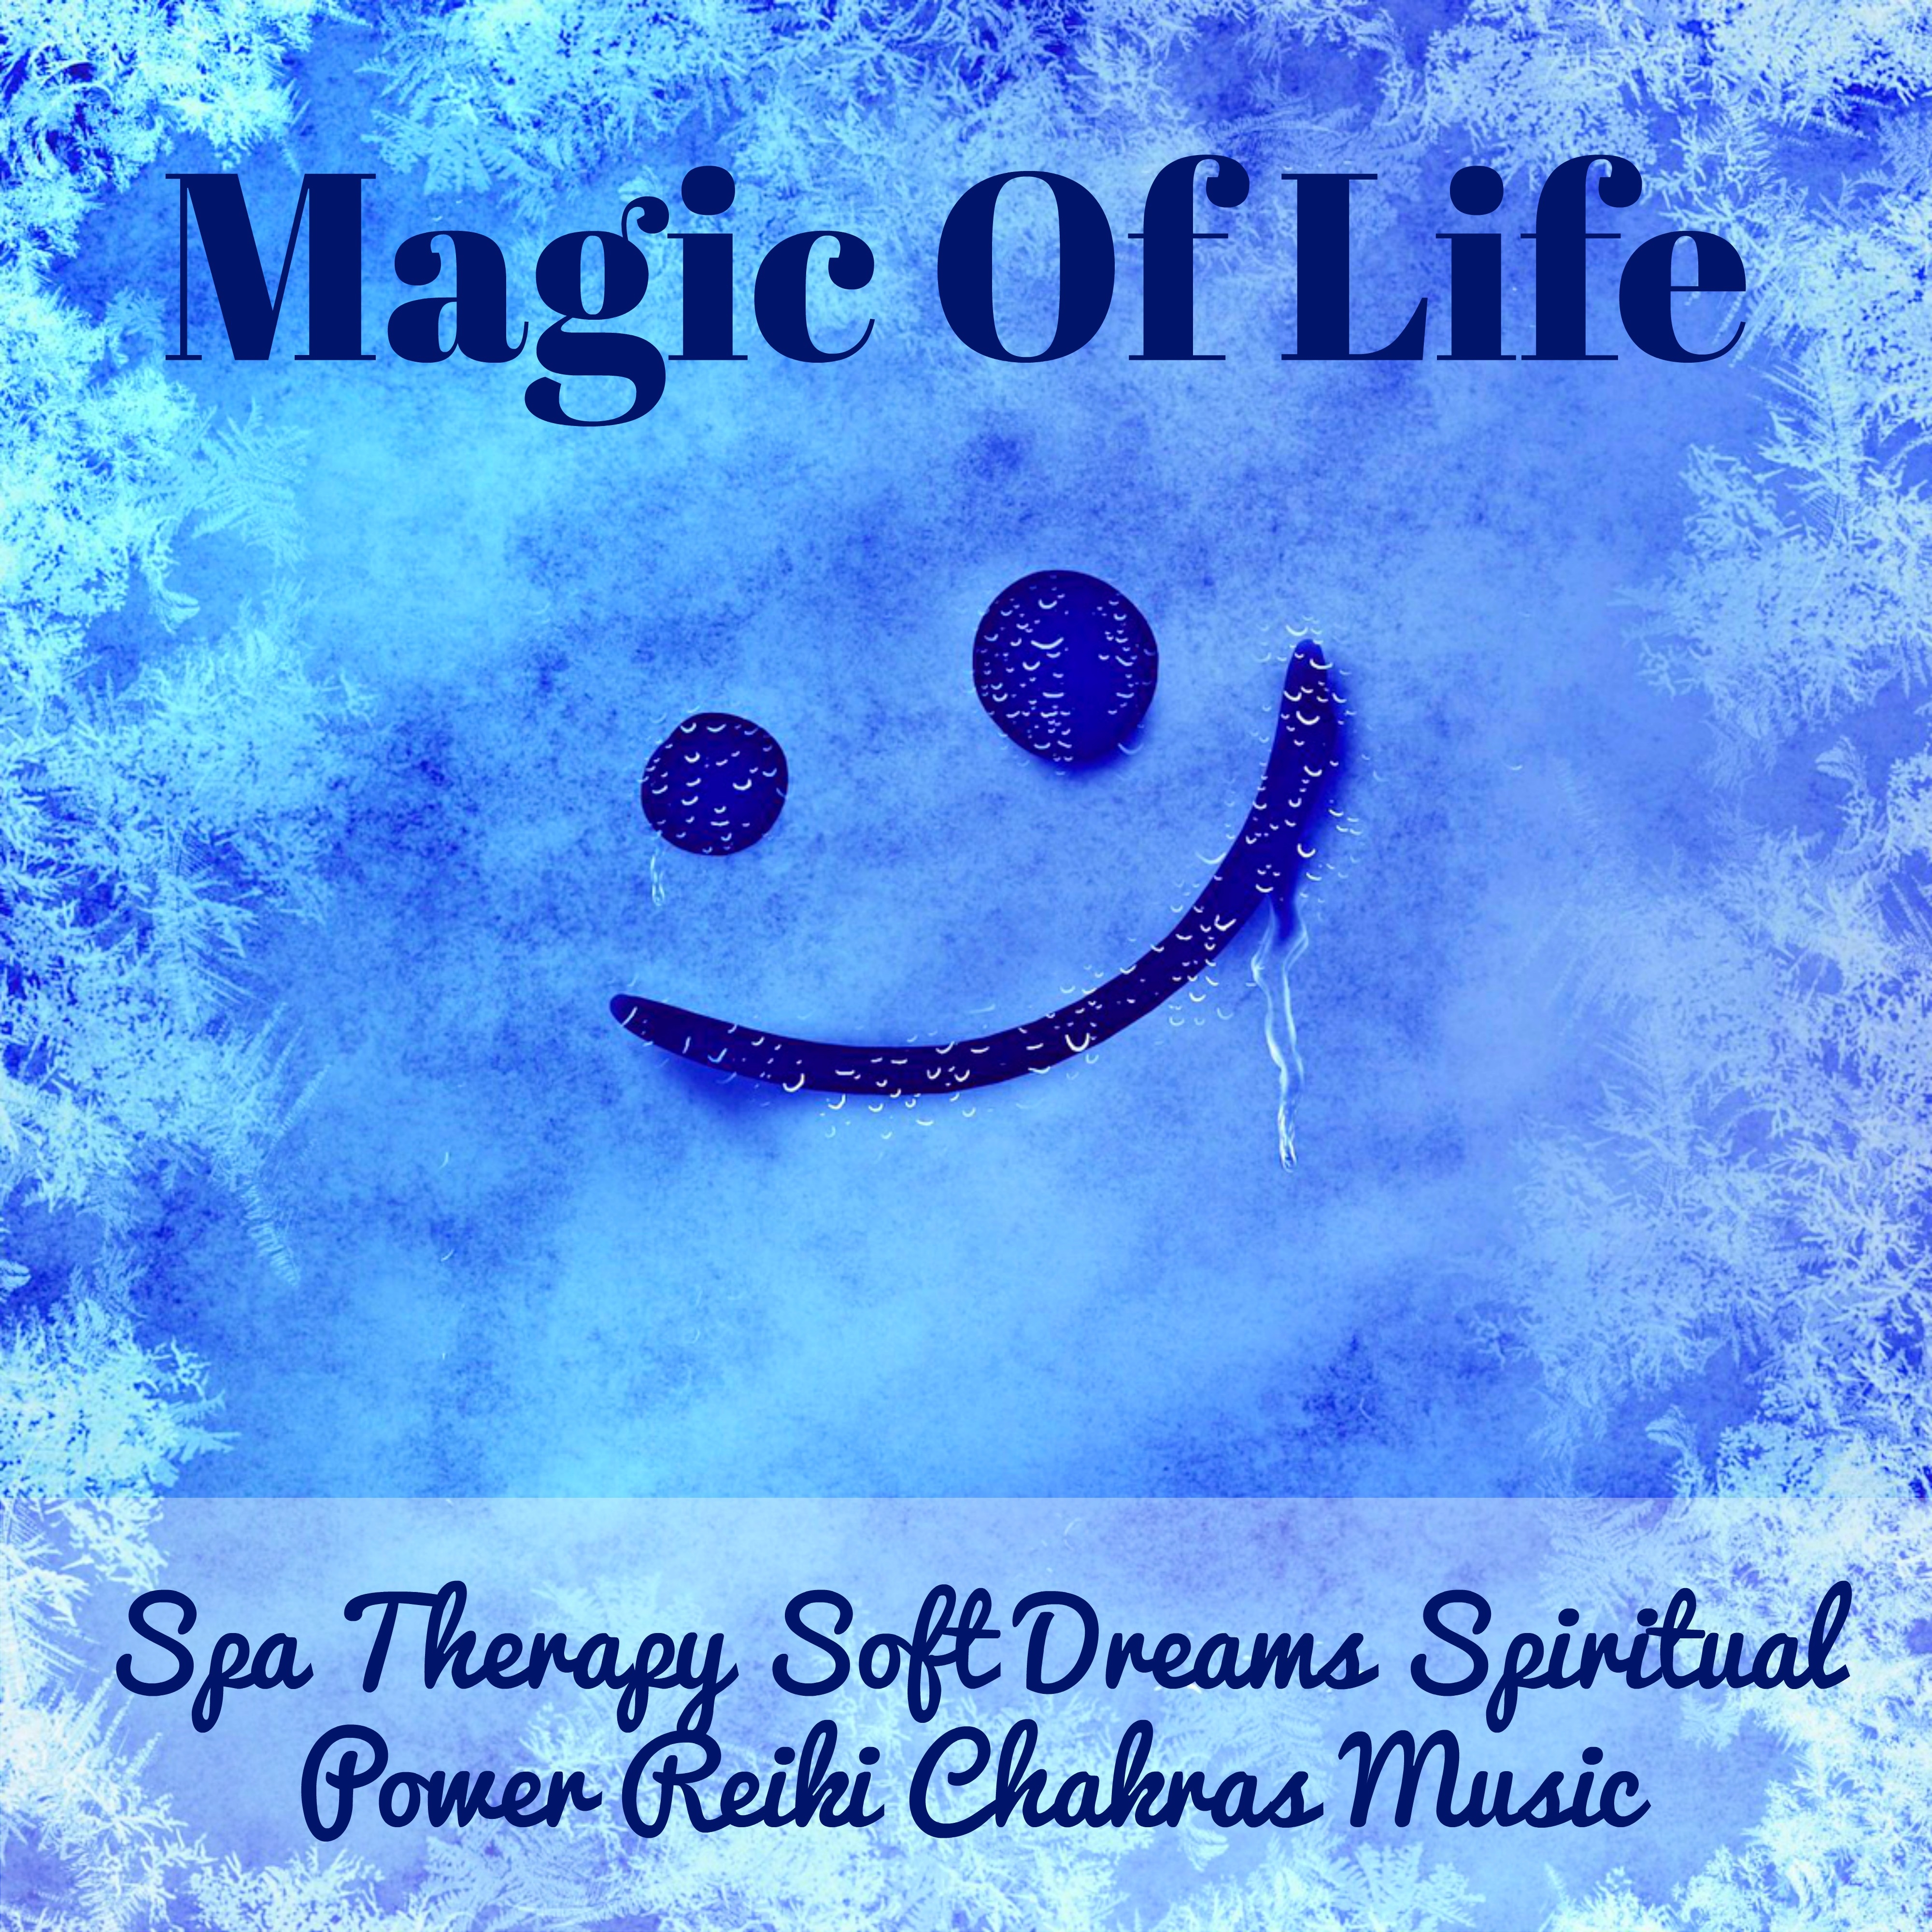 Magic Of Life - Spa Therapy Soft Dreams Spiritual Power Reiki Chakras Music for Good Vibes Energy Cycle Consciousness Expansion with New Age Nature Background